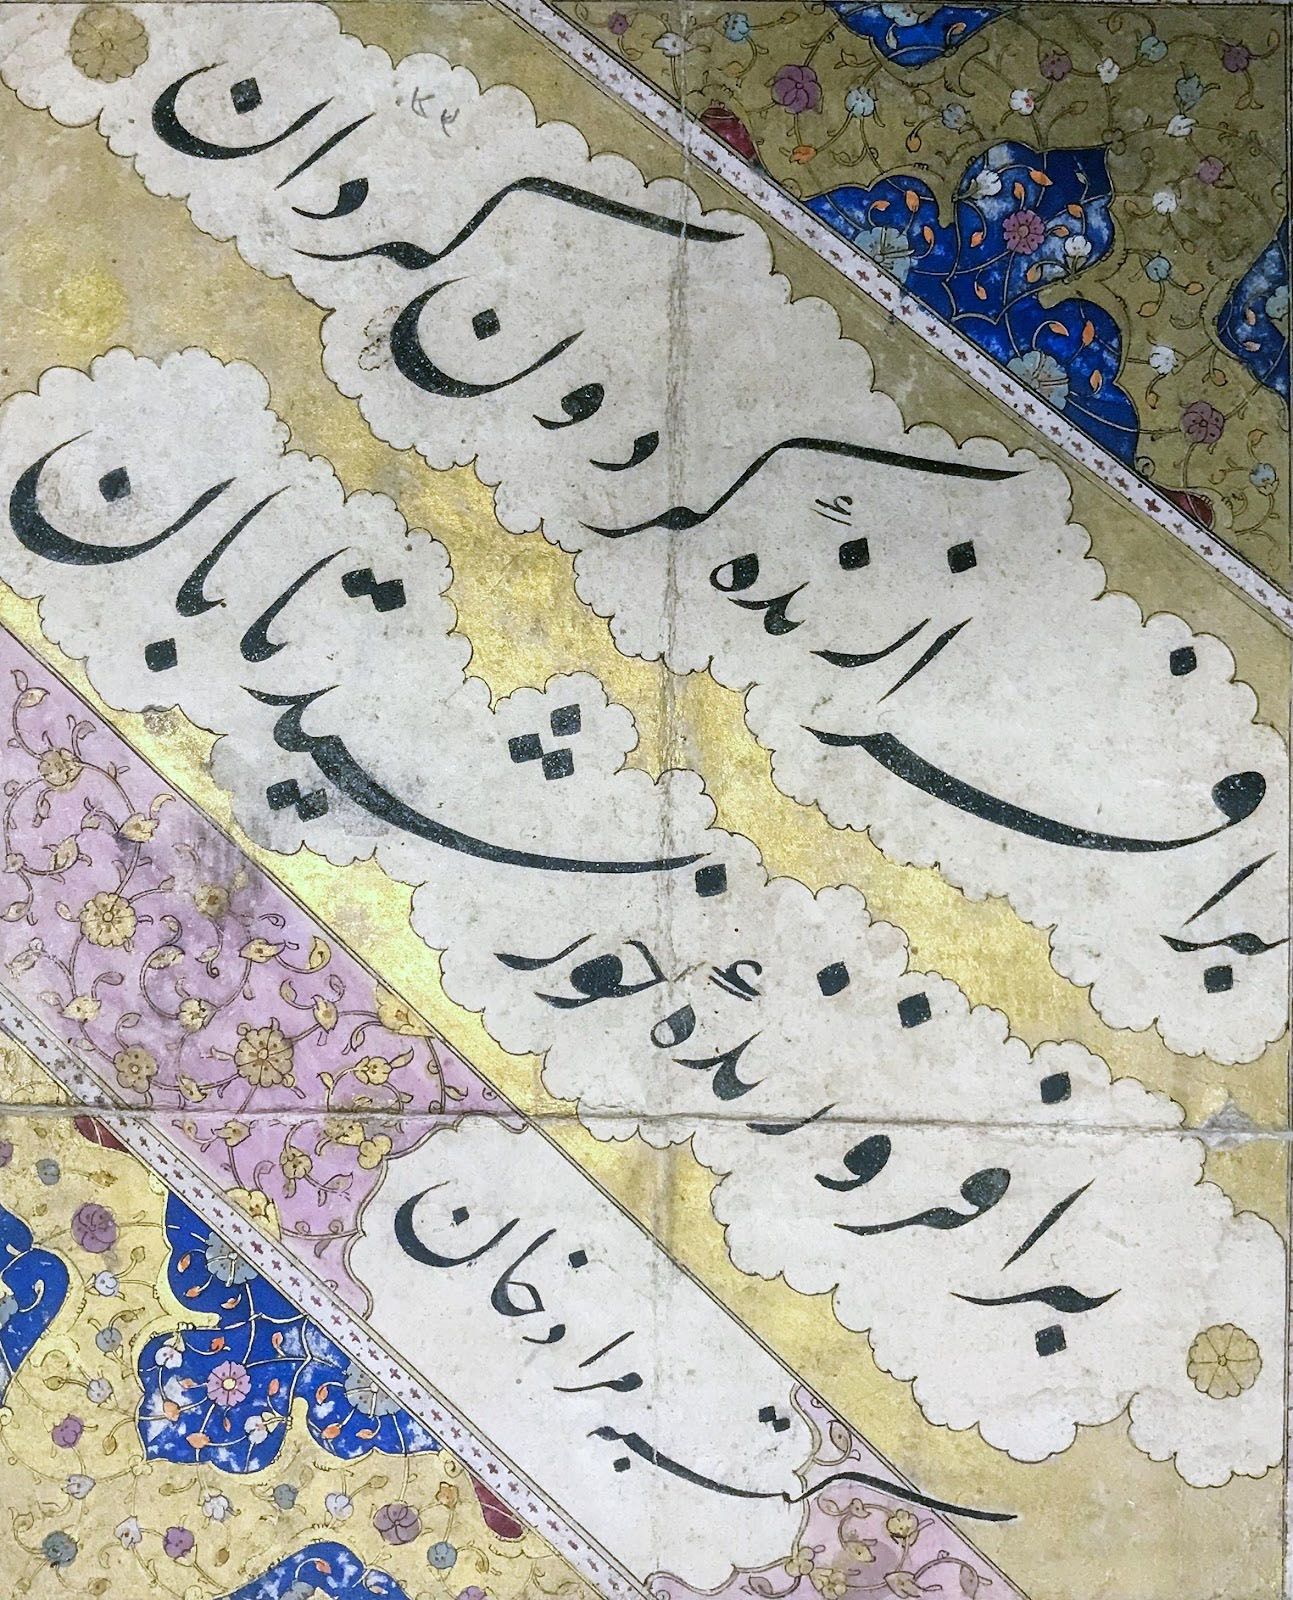 lines of Persian calligraphy in modified Arabic script on the diagonal surrounded by gold and colored painted decorations